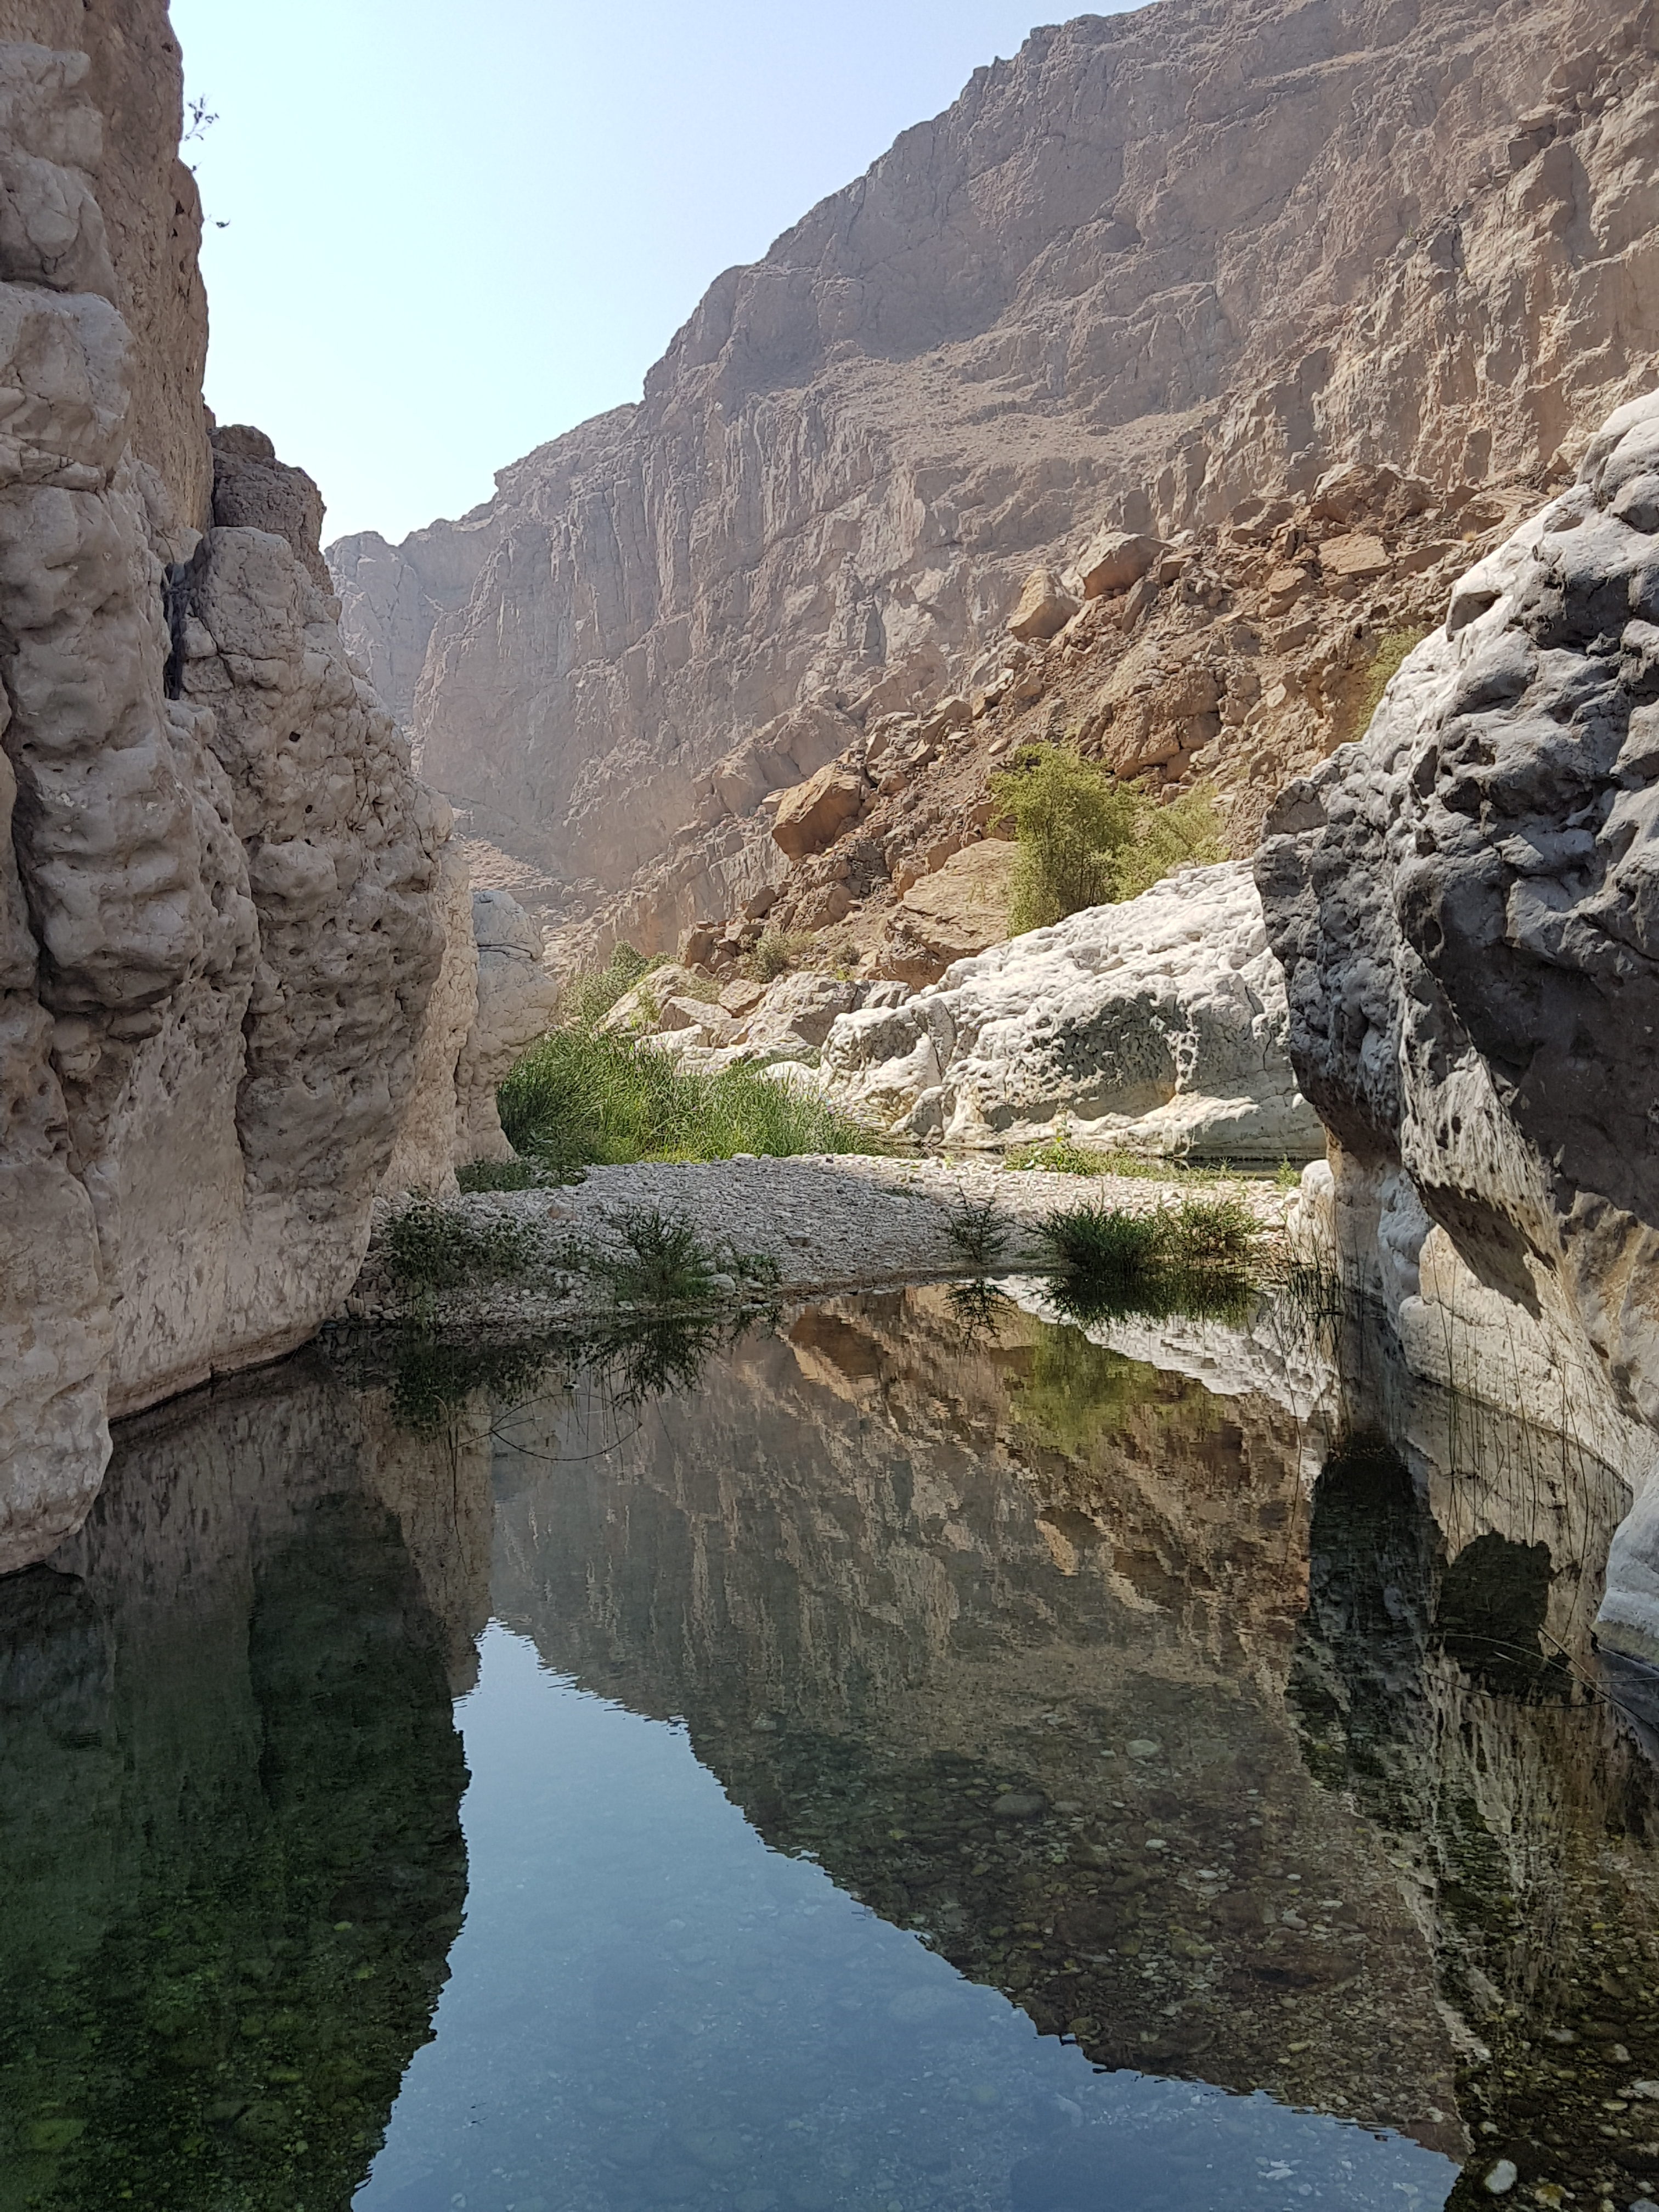 Two Days of Exploring Oman, Camping and Hiking in the Hajar Mountains